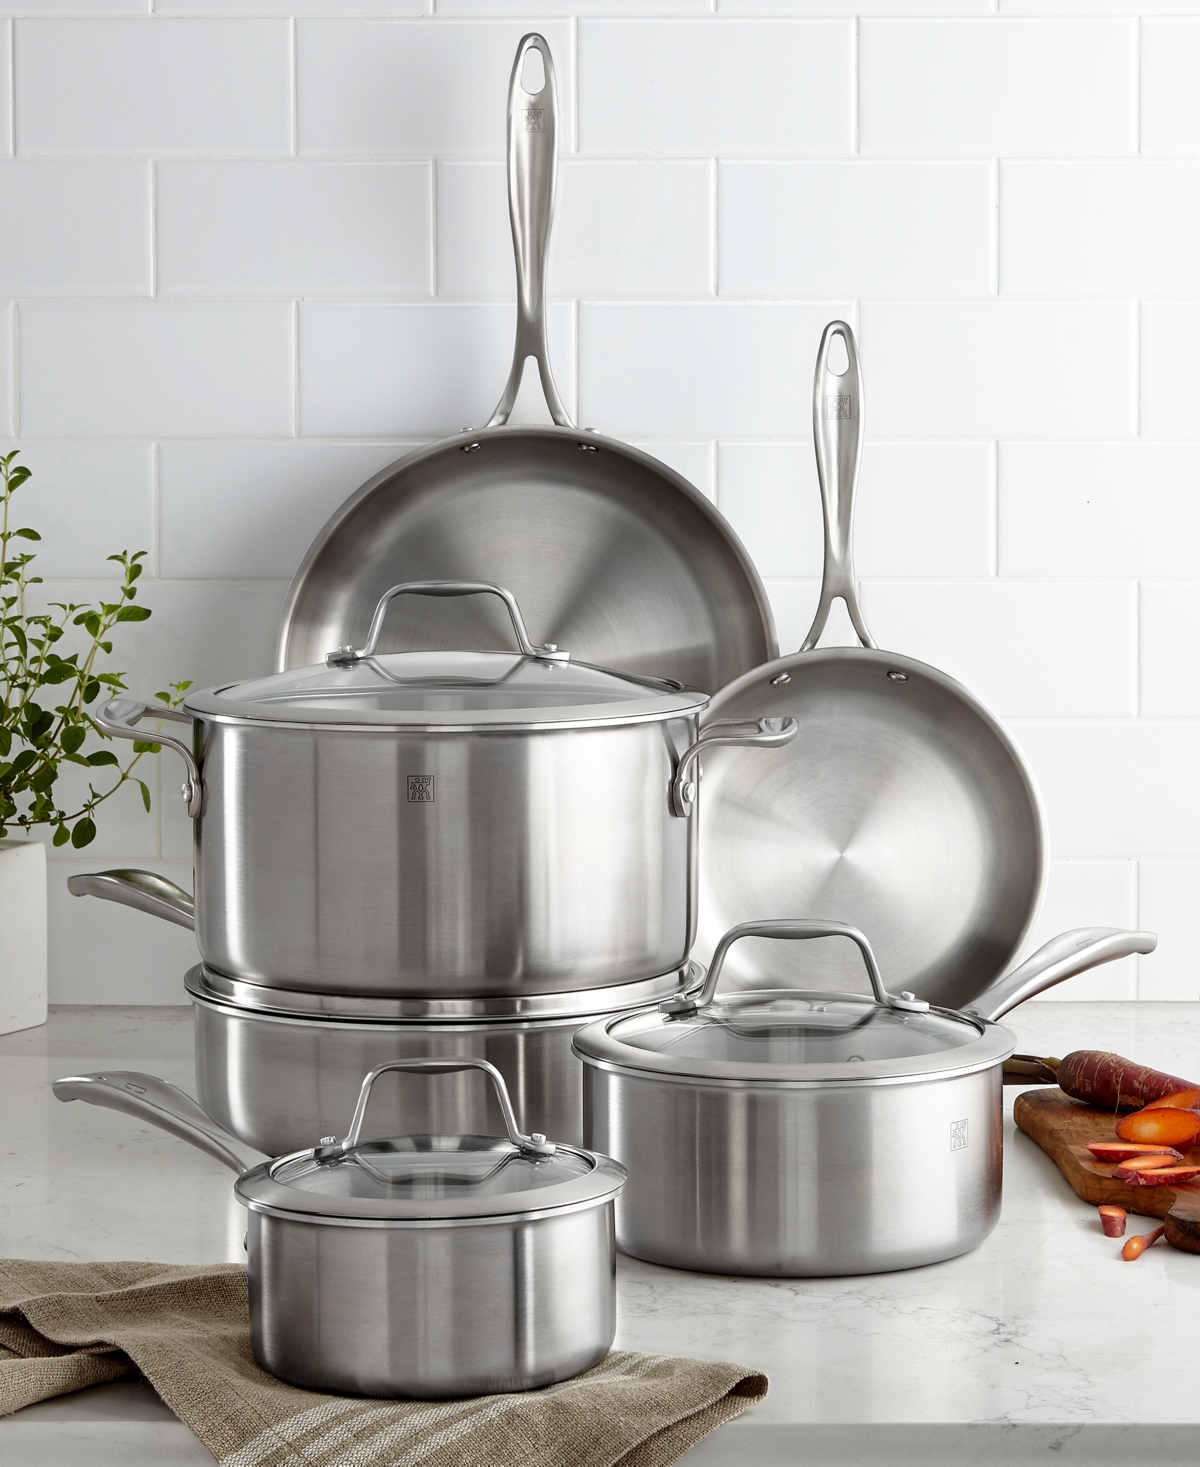 Zwilling J.a. Henckels Spirit 10-Piece Polished Stainless Steel Cookware Set